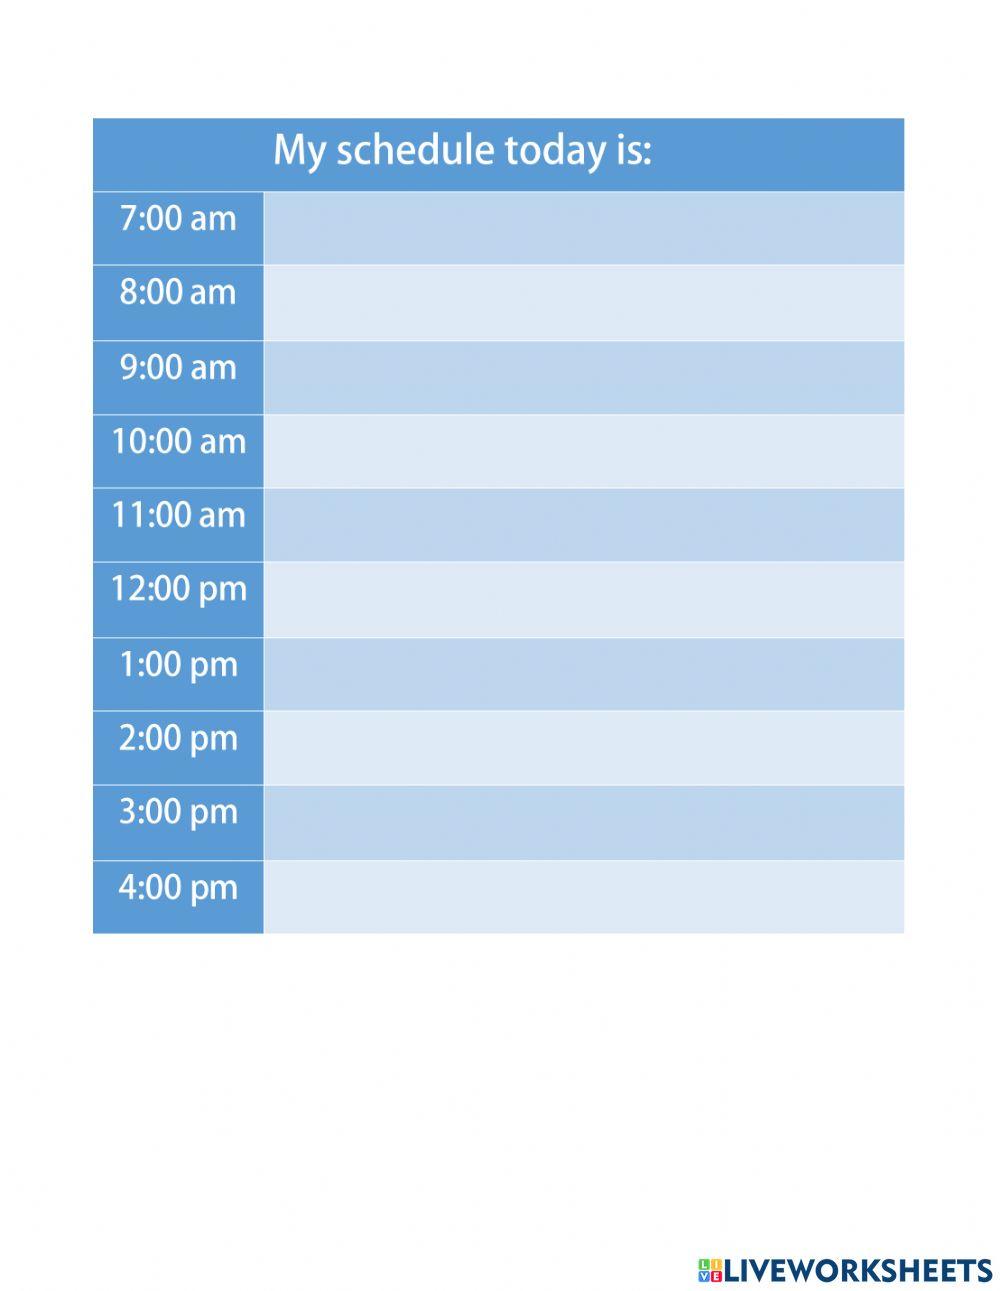 My Schedule Today